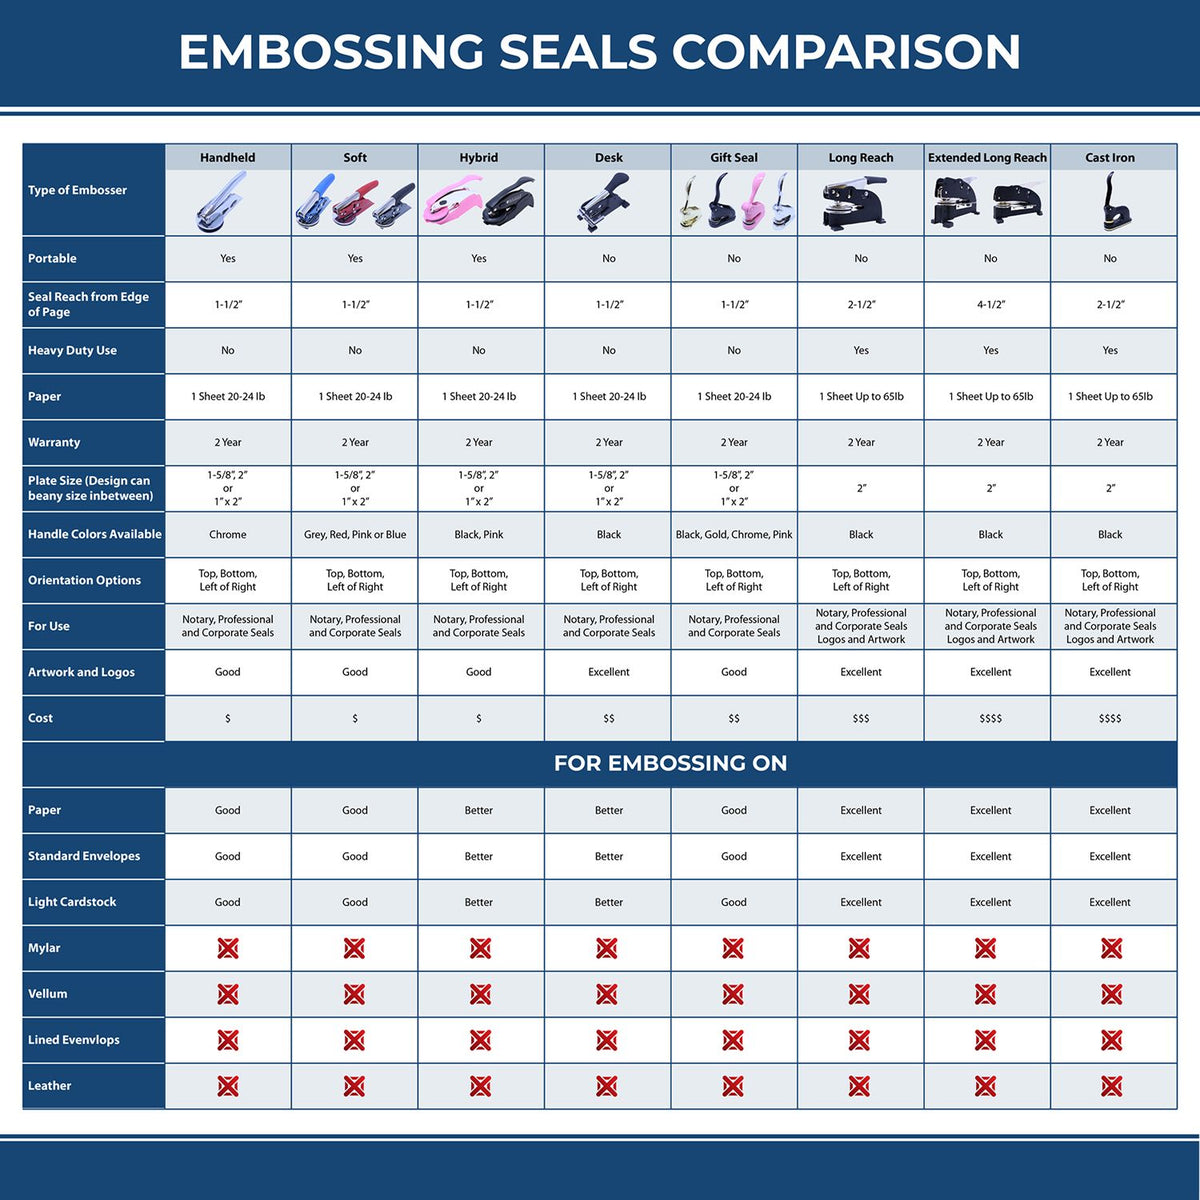 A comparison chart for the different types of mount models available for the Handheld Delaware Architect Seal Embosser.